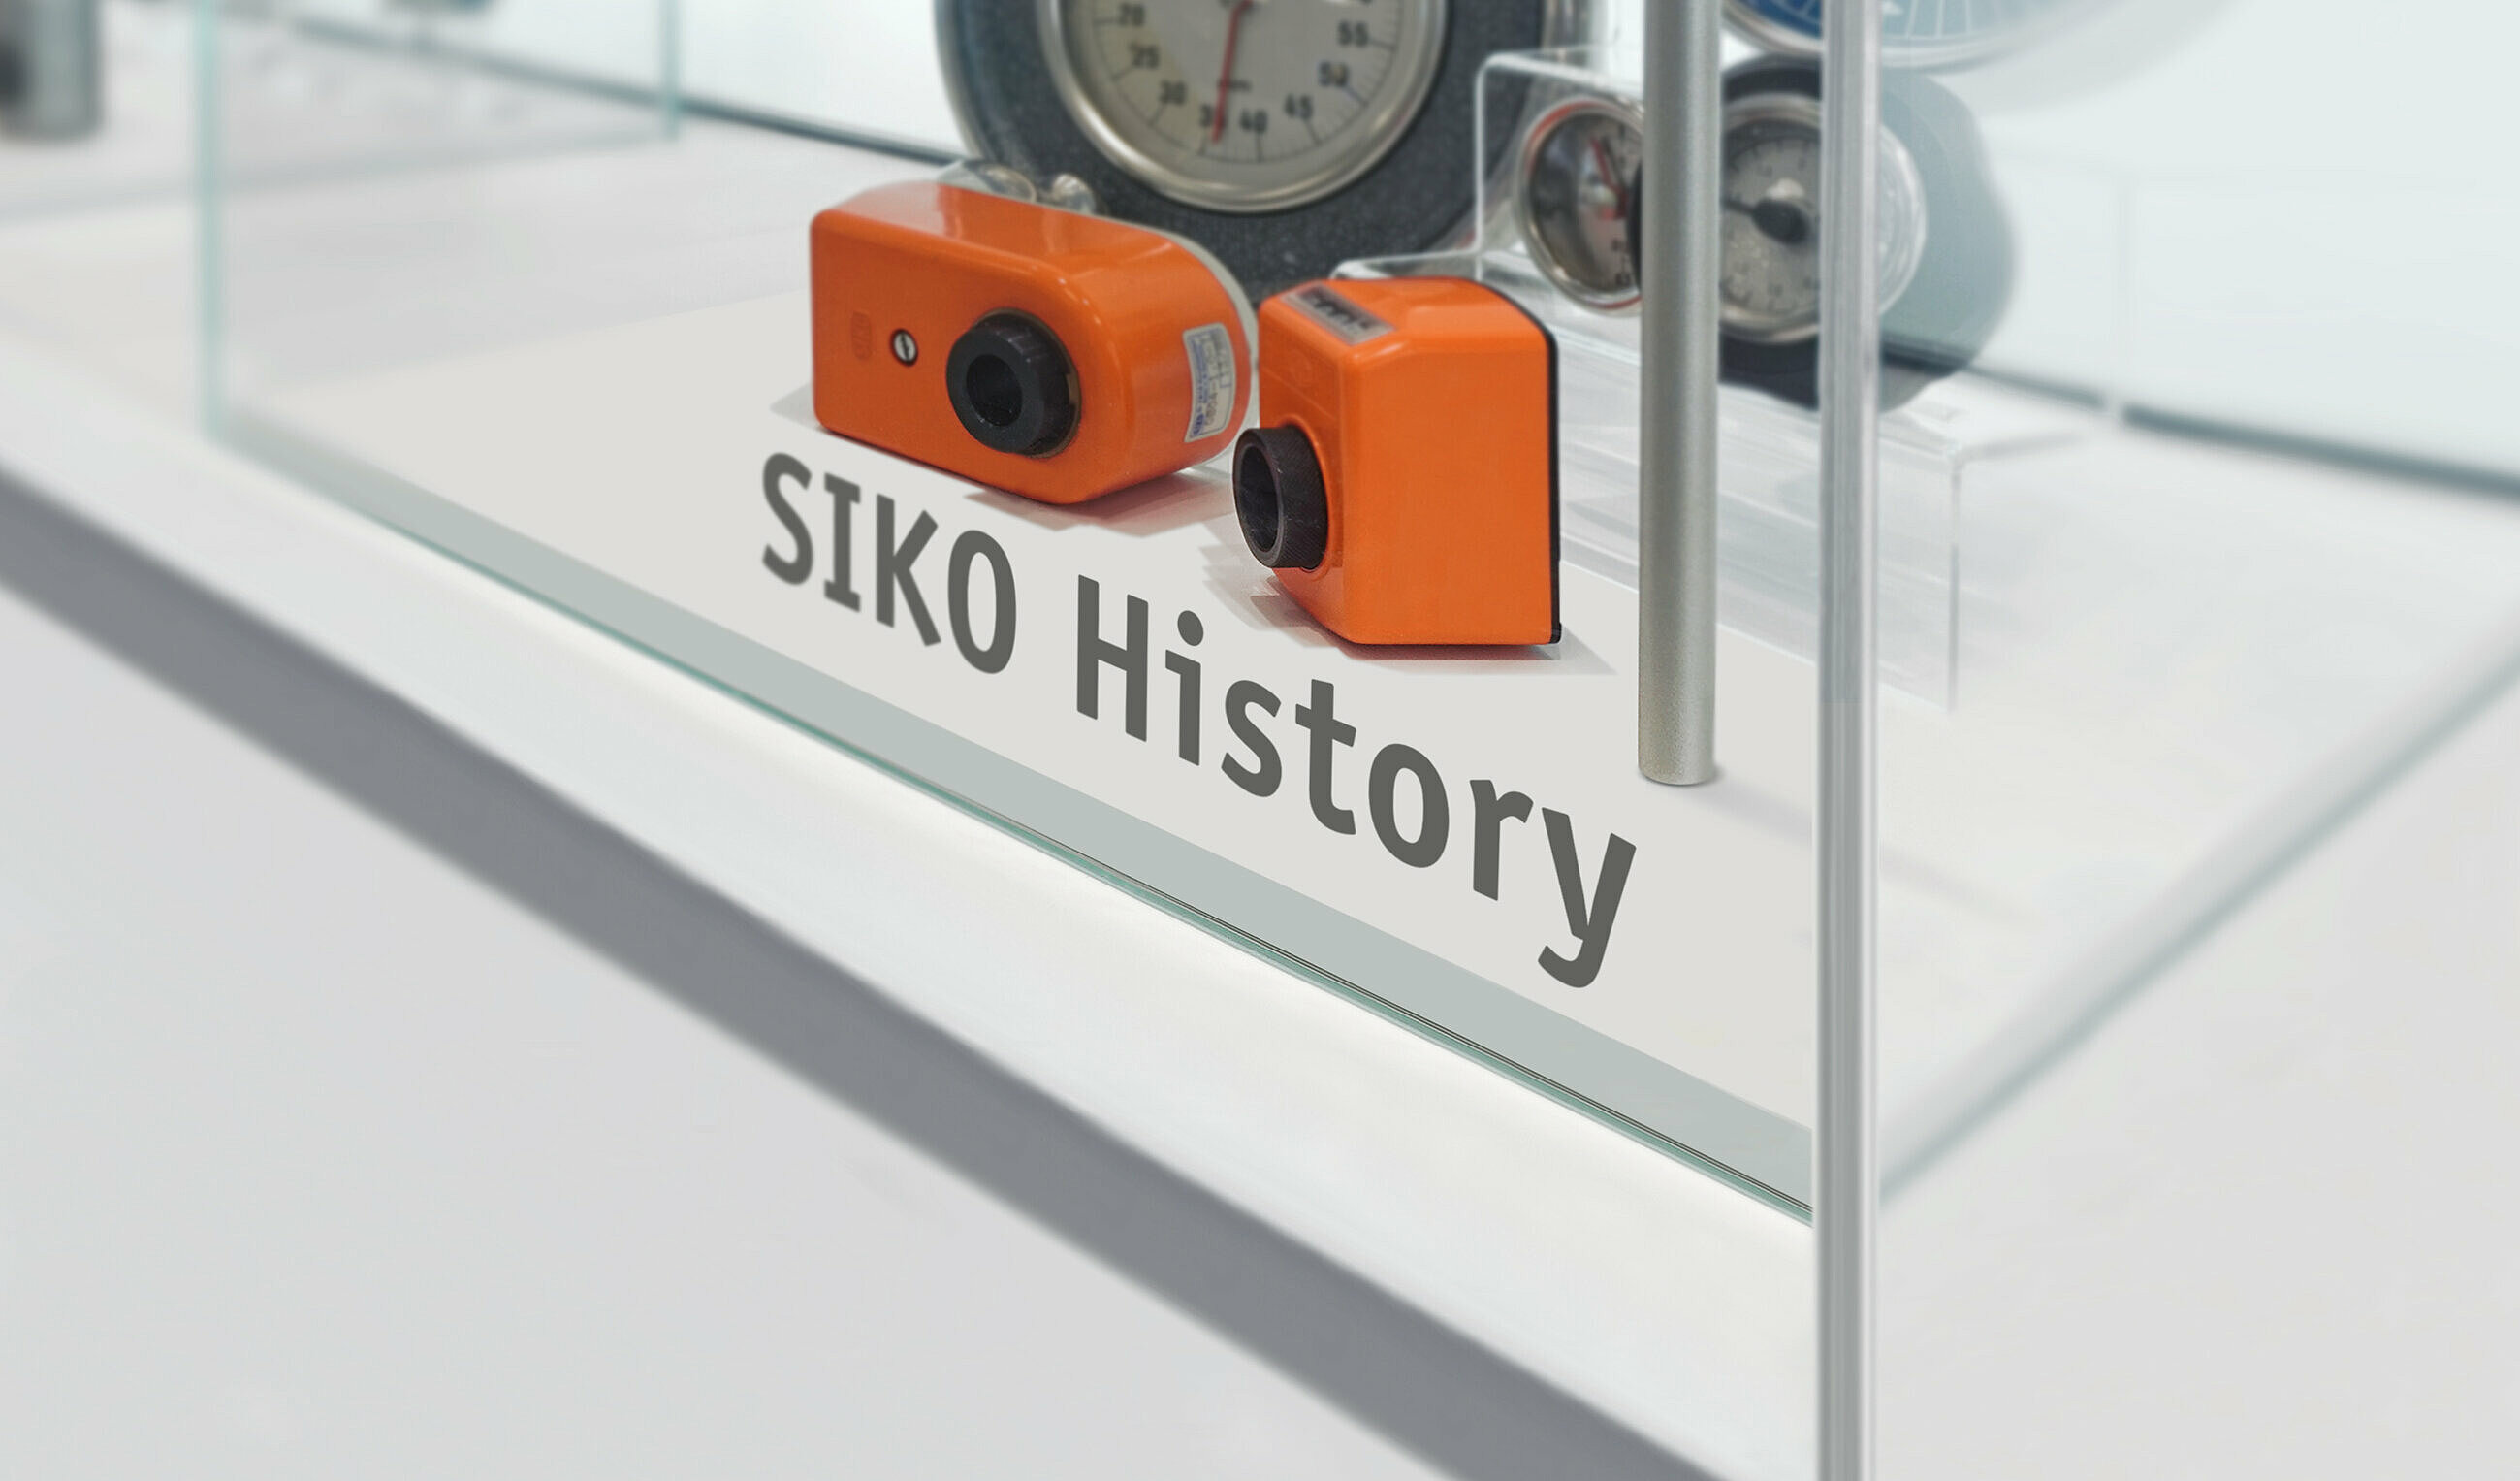 Historical products from SIKO displayed in a glass showcase